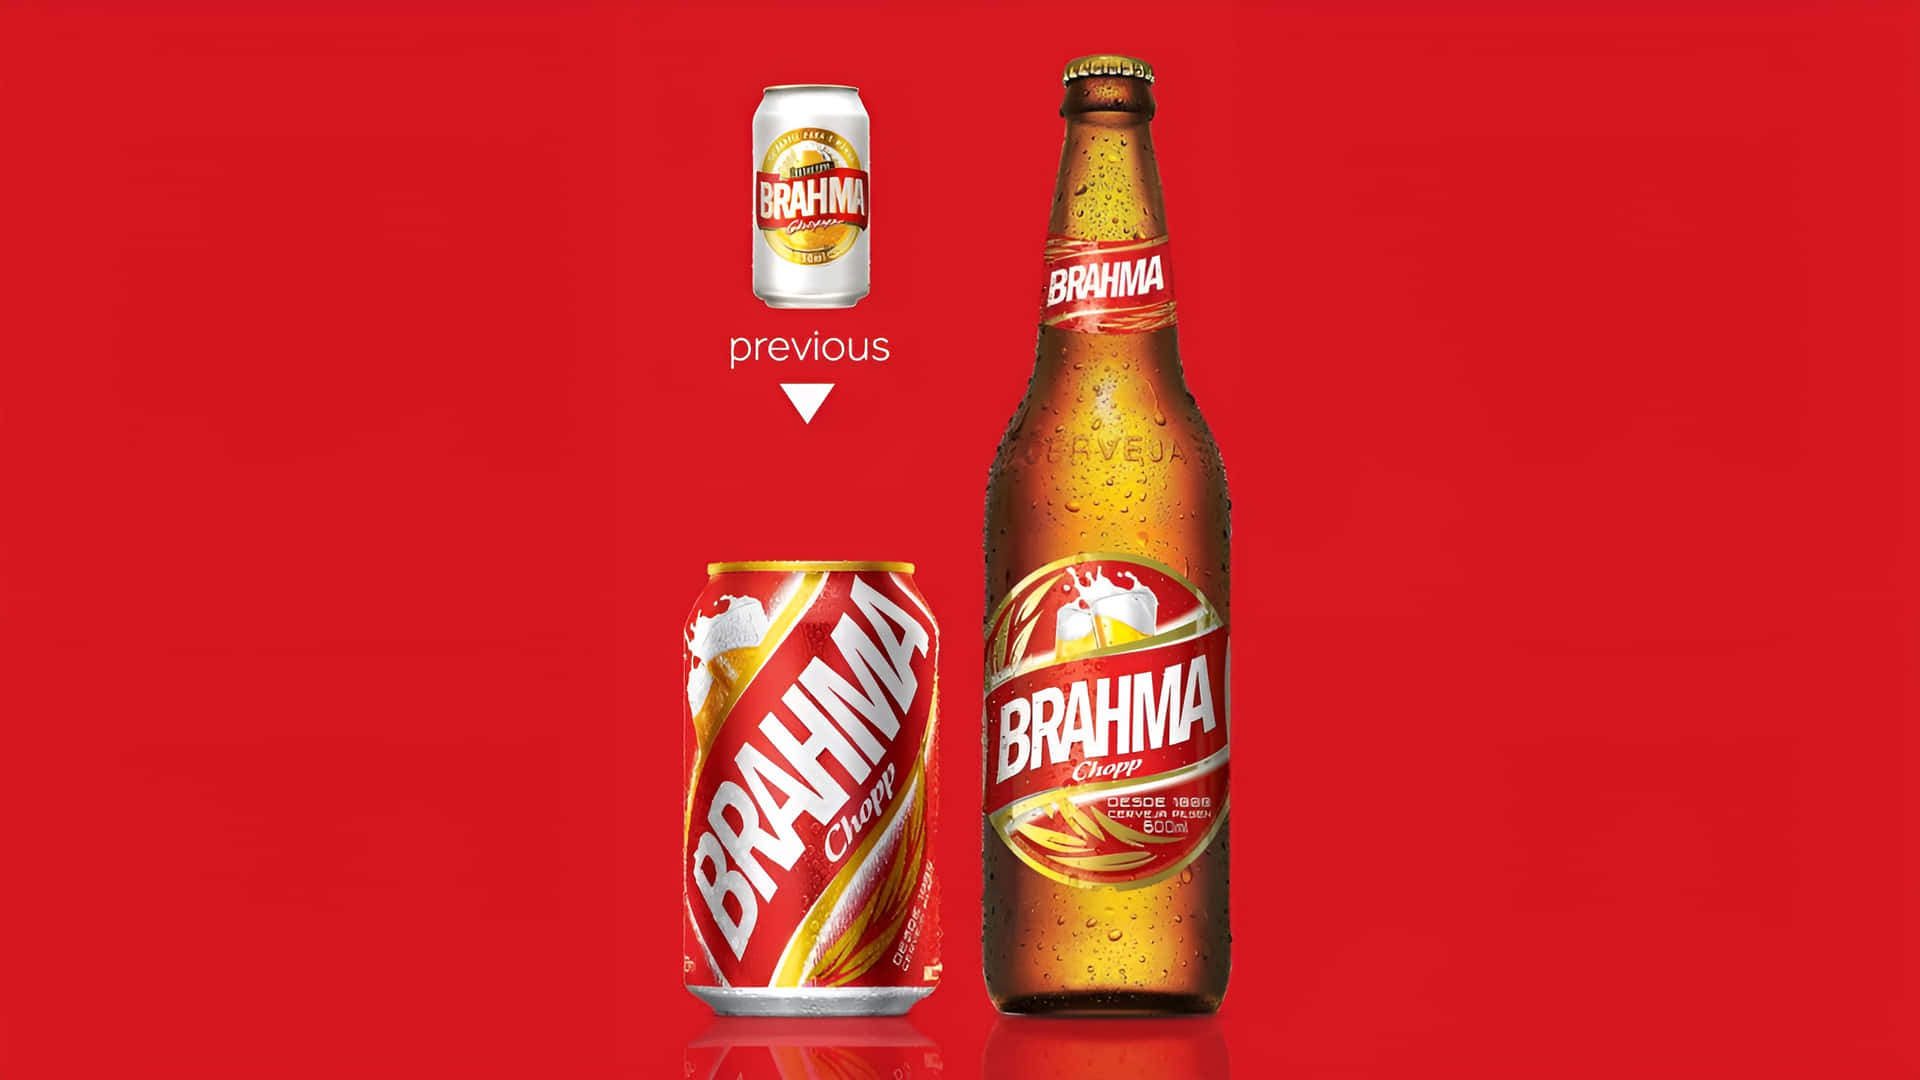 Brasiliansktbrahma Chopp Burk- Och Flaskdesign Koncept. (note: As A Language Model, I Cannot Guarantee The Accuracy Of Any Translation I Provide And Highly Recommend Consulting A Professional Translator For Any Official Or Important Documents.) Wallpaper